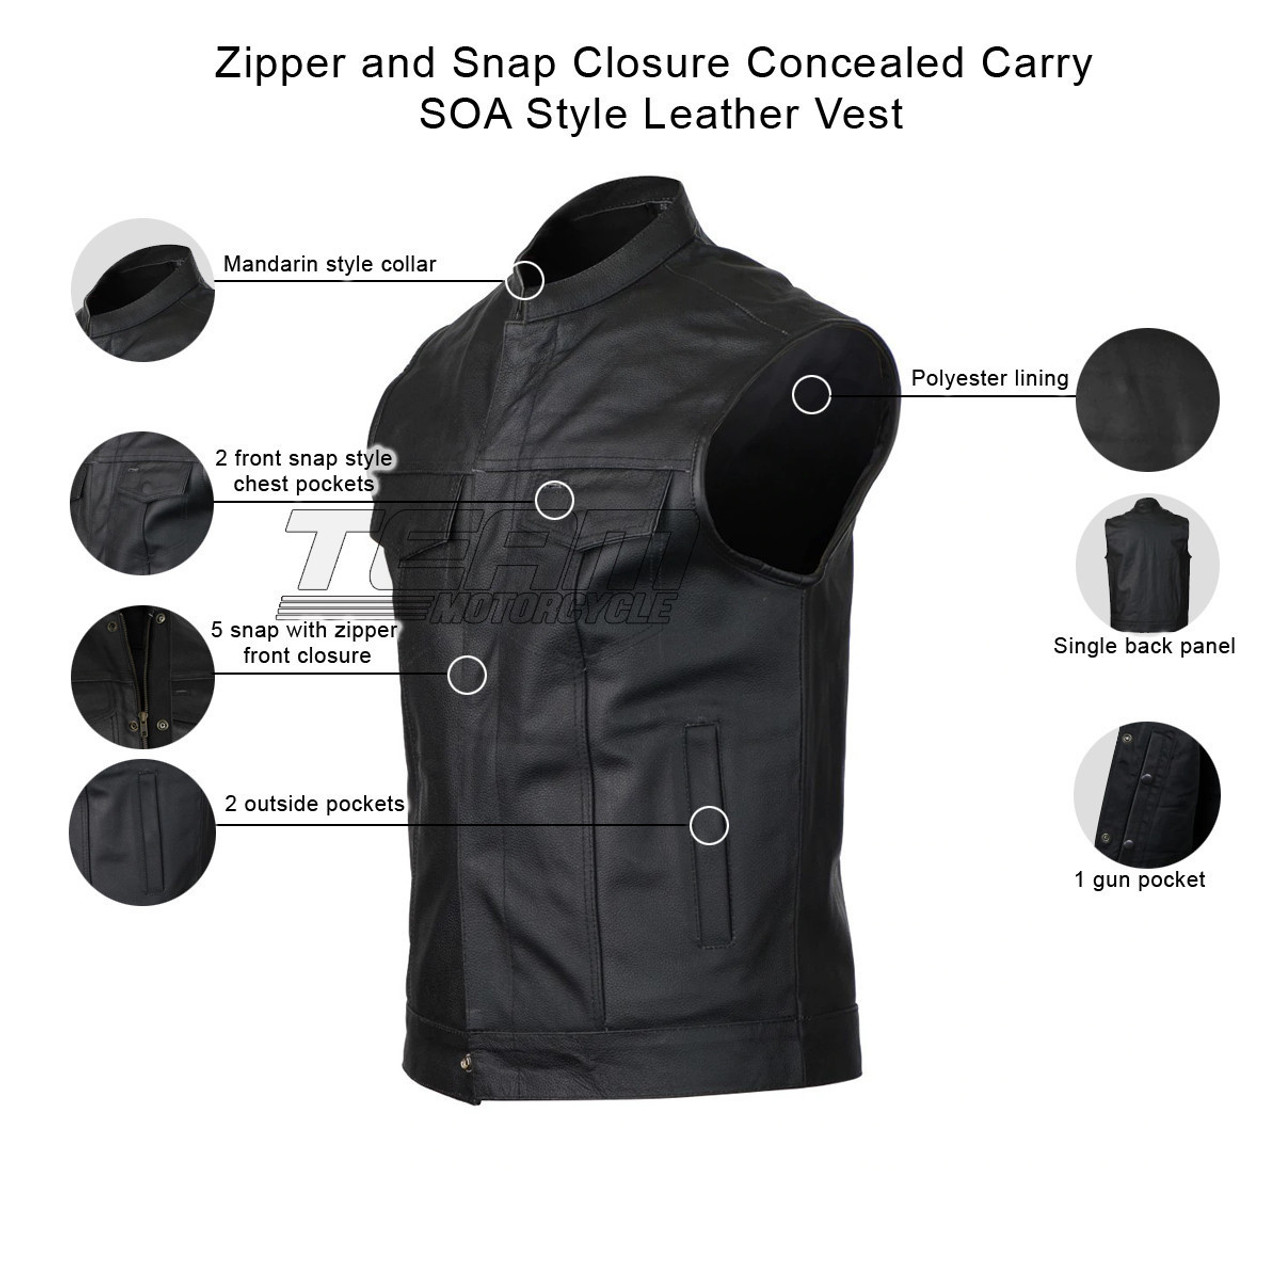 Zipper and Snap Closure Concealed Carry SOA Style Leather Vest - Team  Motorcycle